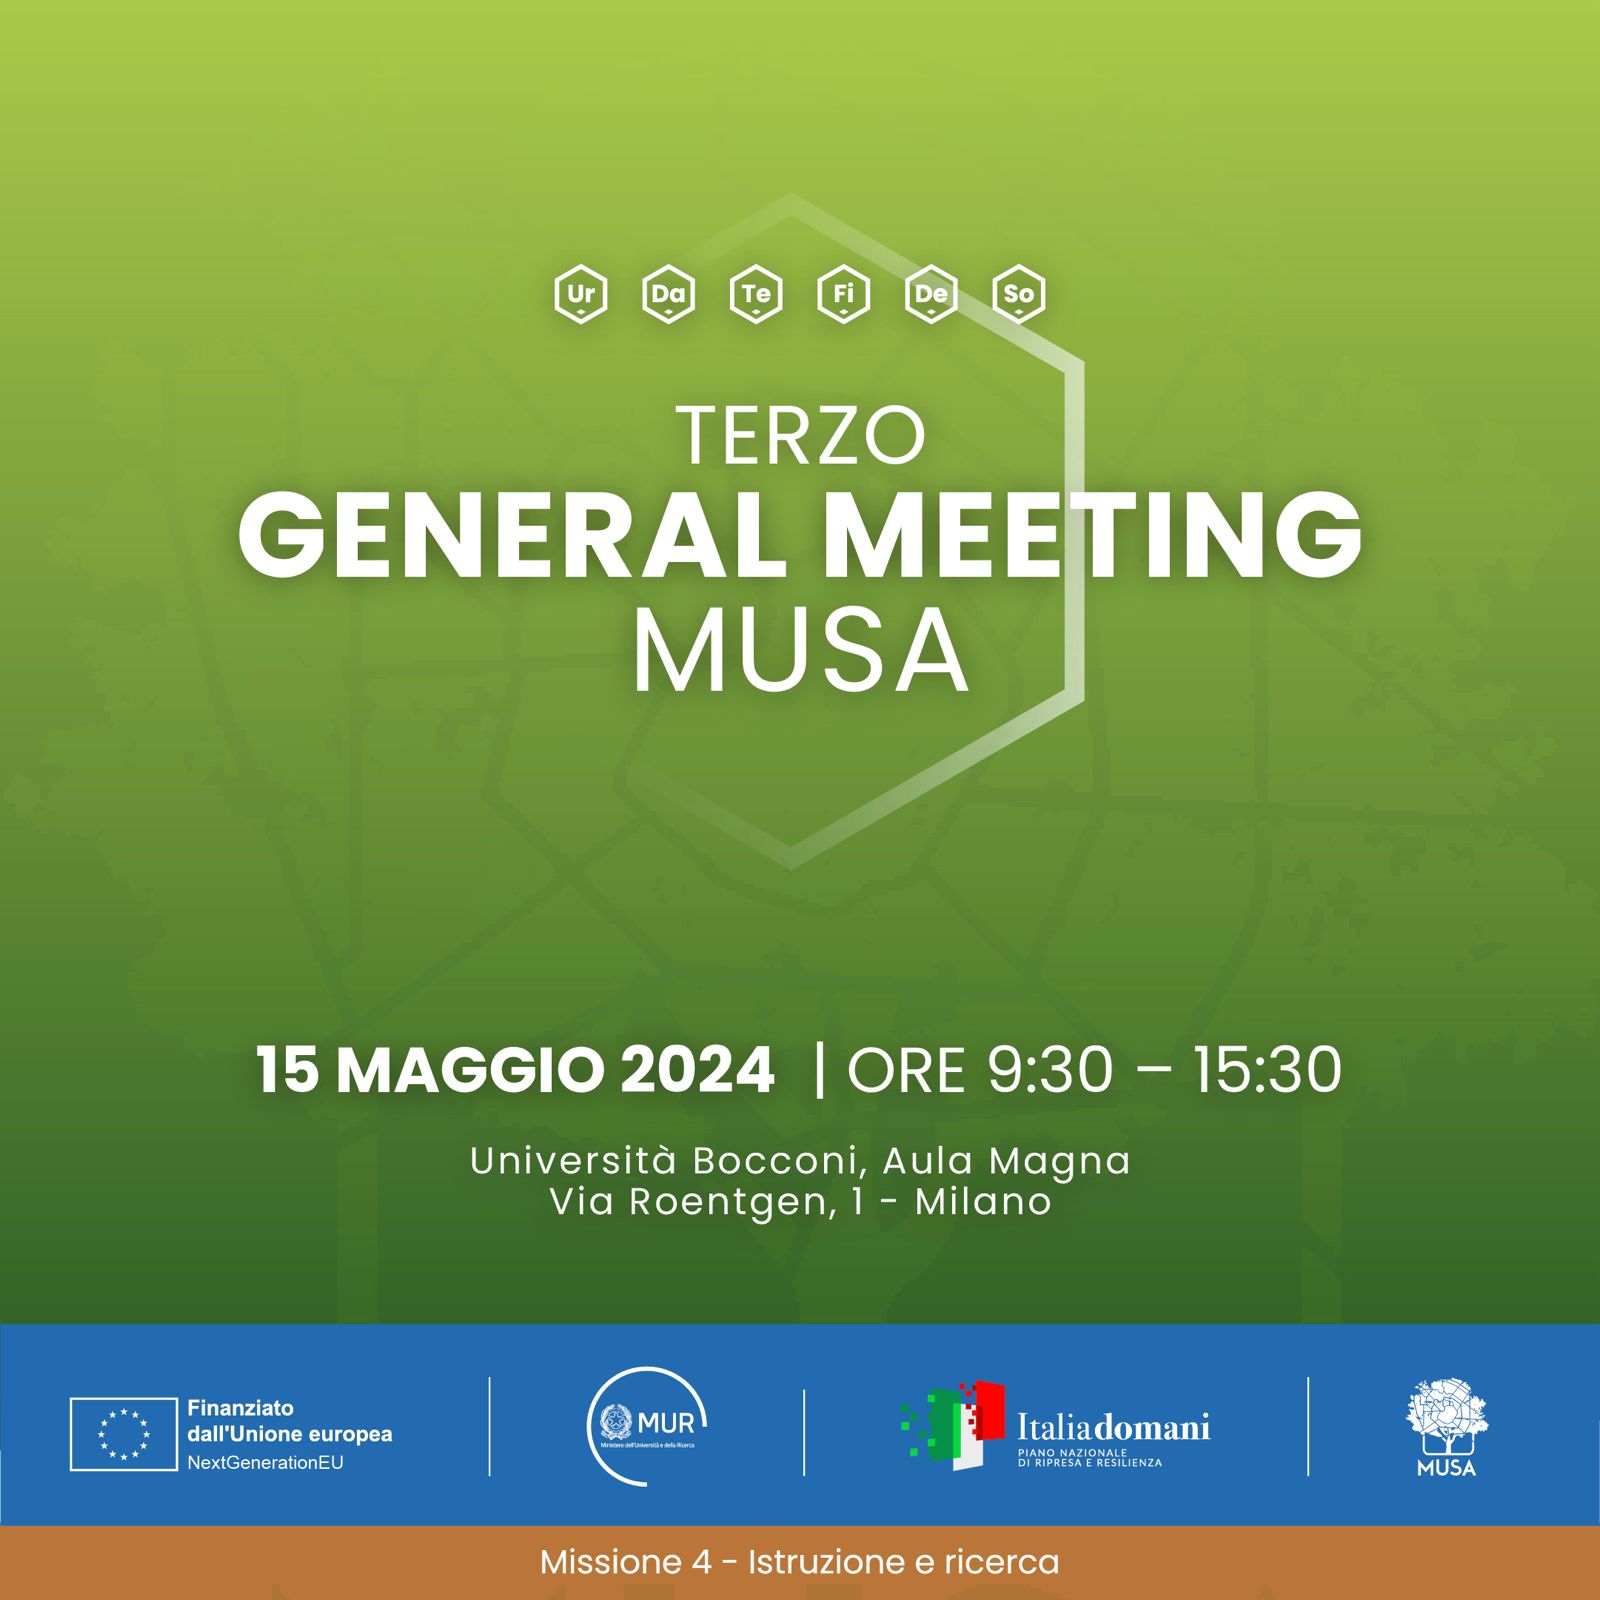 THIRD GENERAL MEETING OF MUSA, PROGRAM AVAILABLE ONLINE